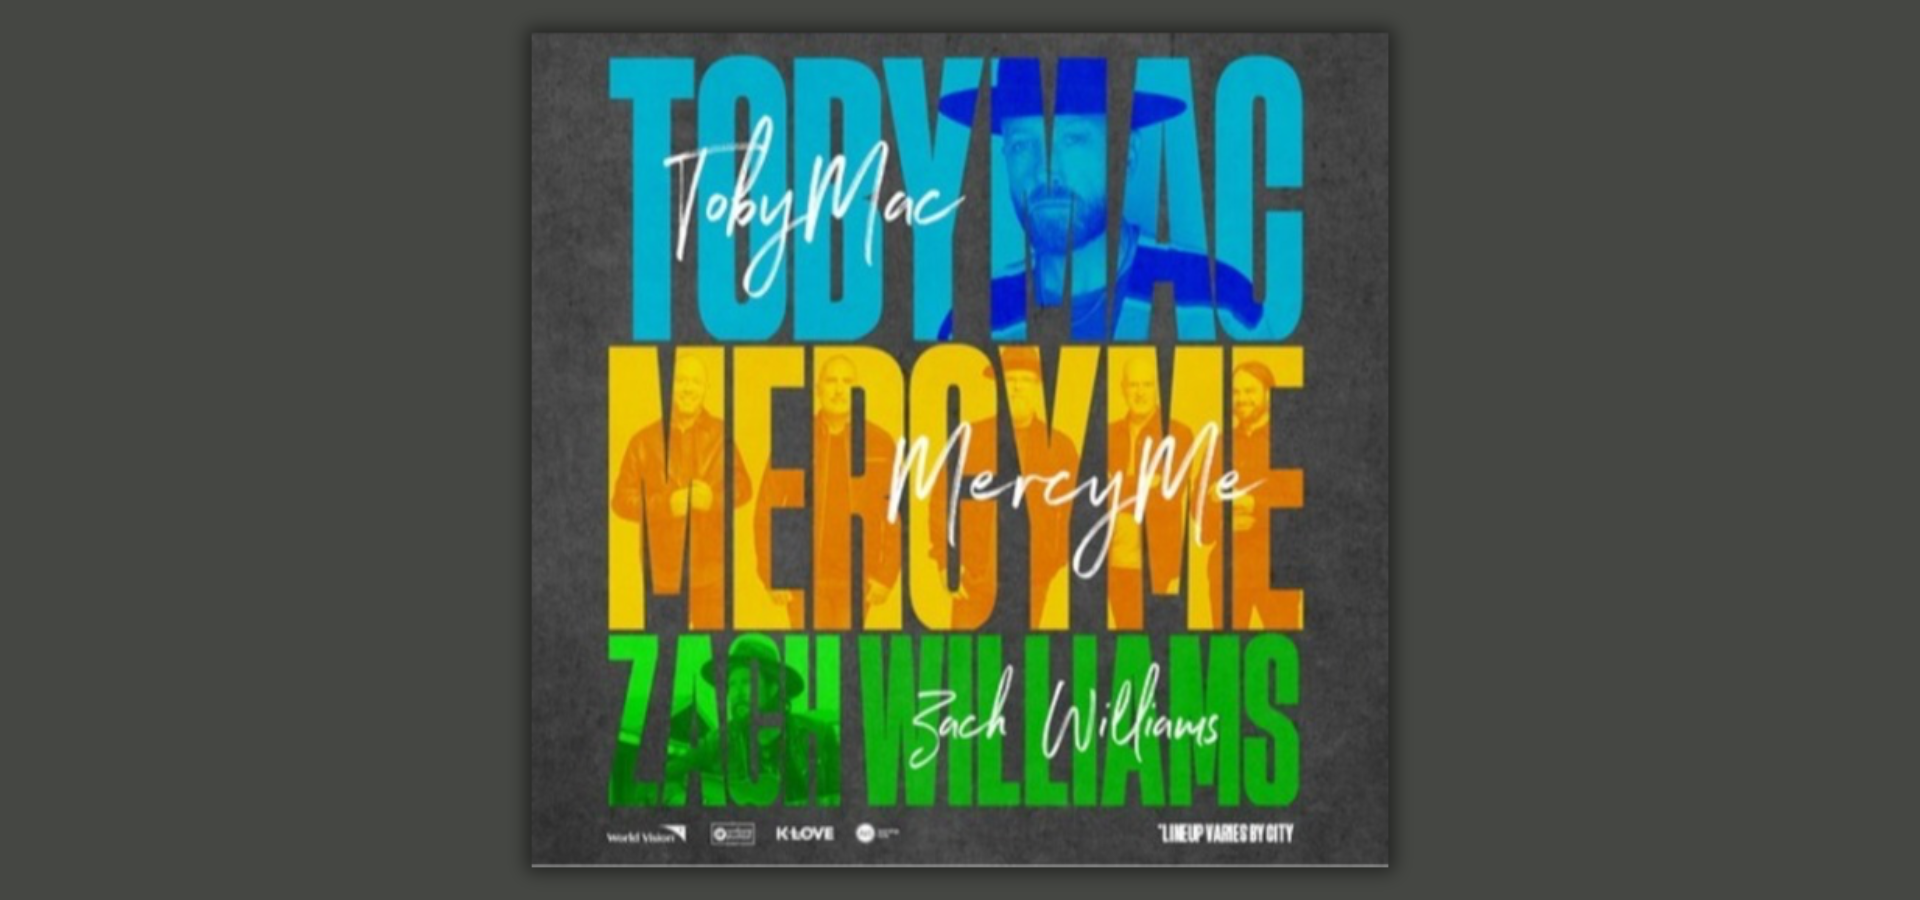 TobyMac, MercyMe and Zach Williams Reunite This Fall